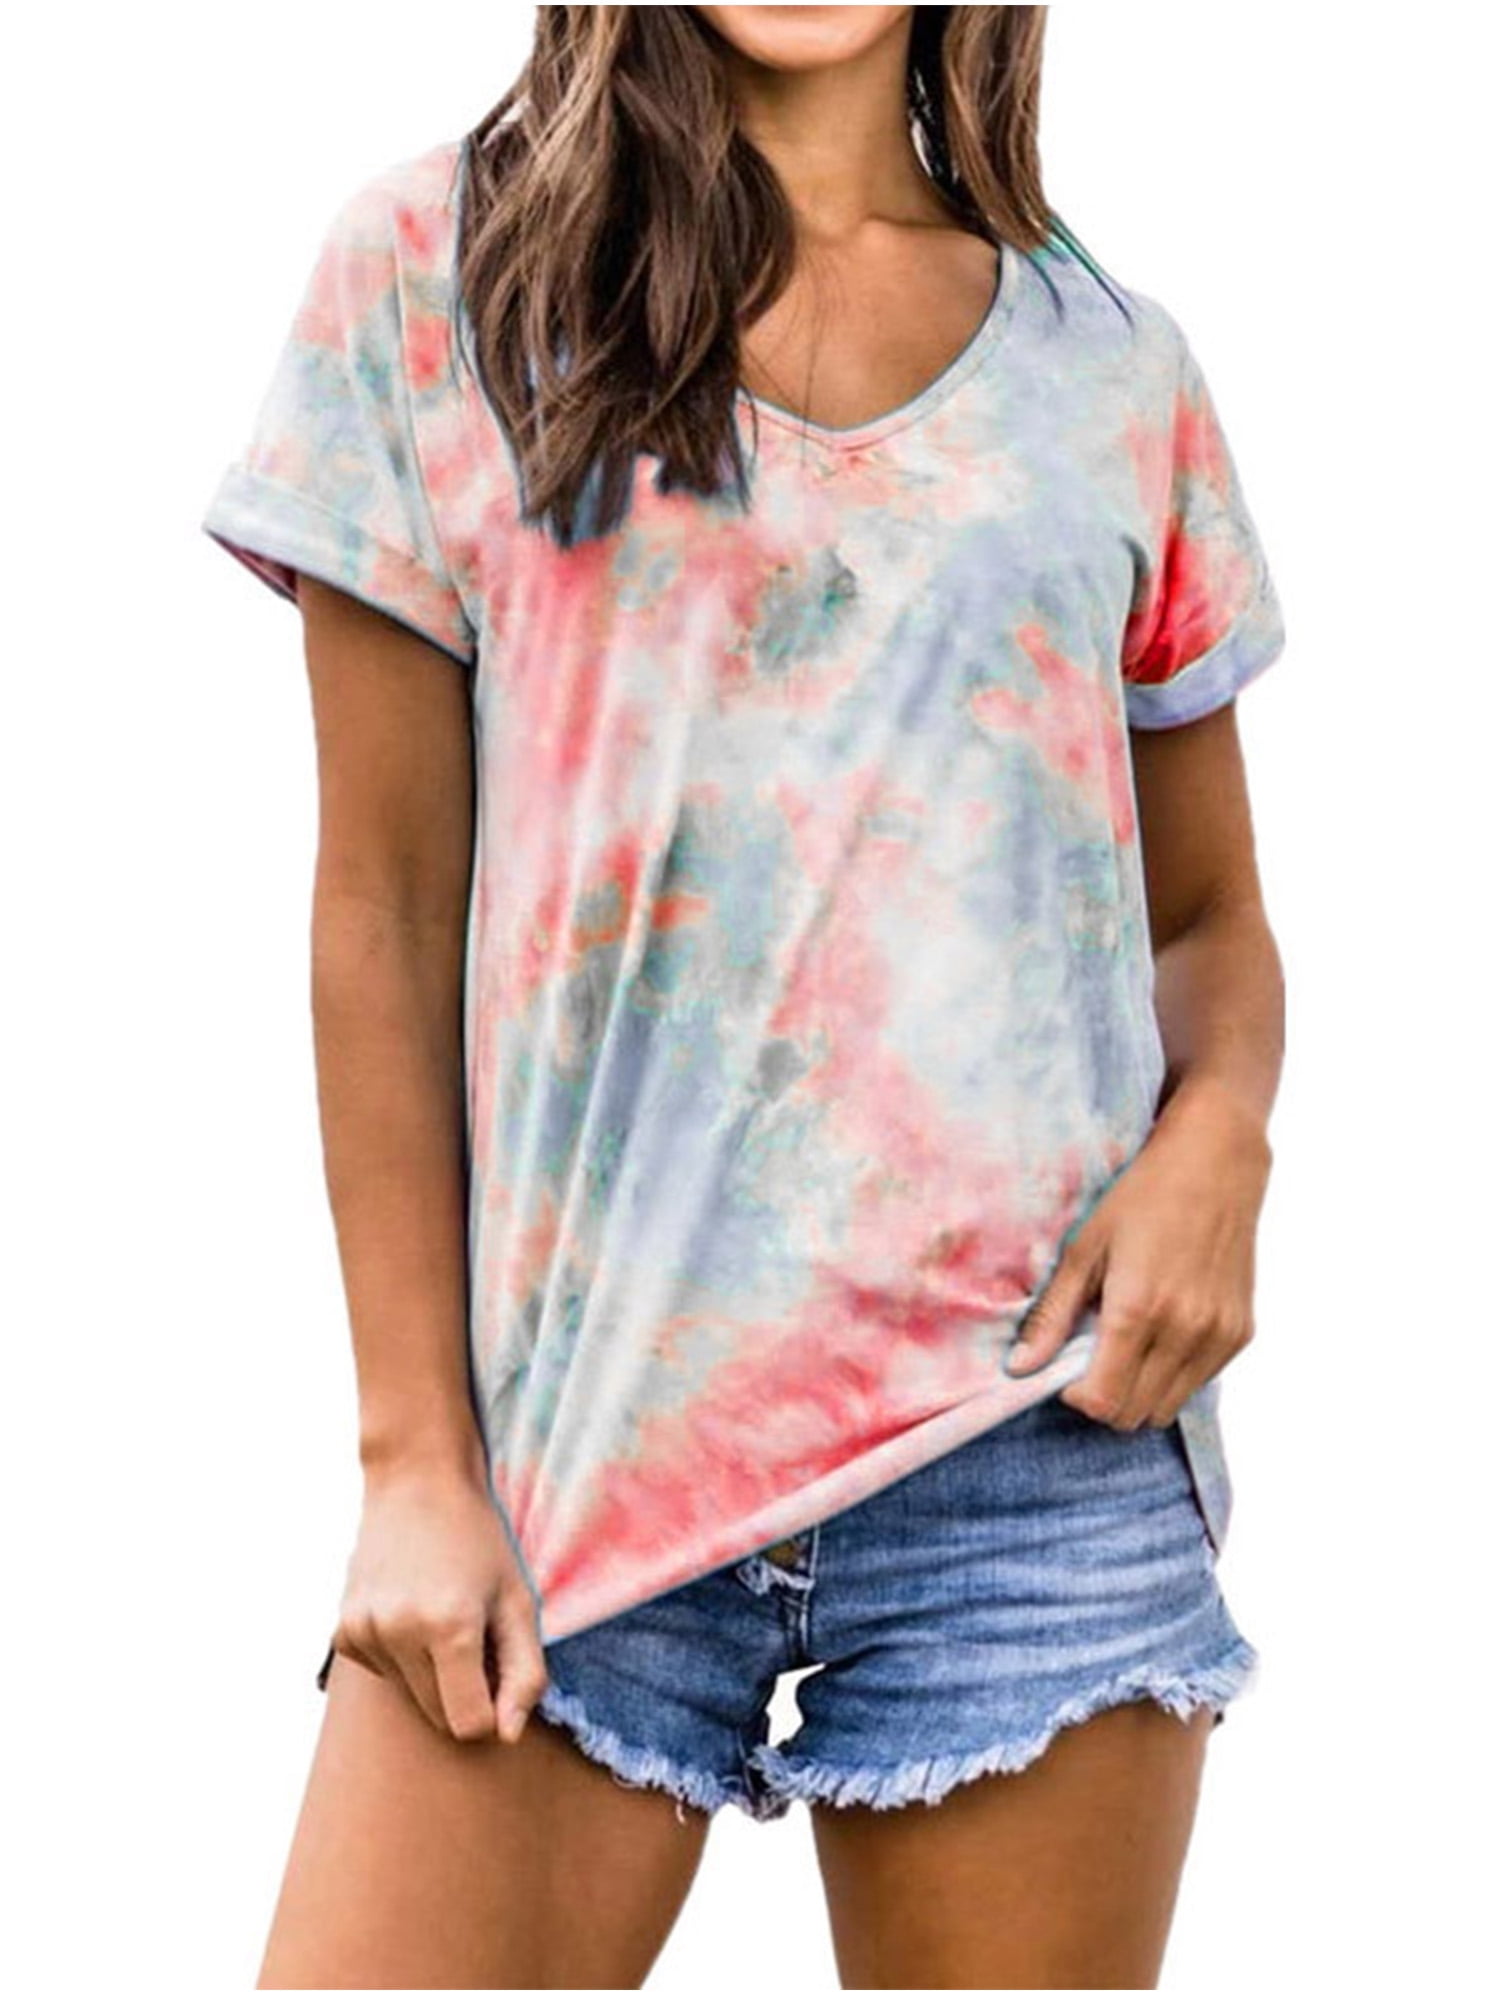 Details about   Ladies Womens Short Sleeve Tie Dye Boxy 2 Piece T Shirt Shorts Set Top Tee 